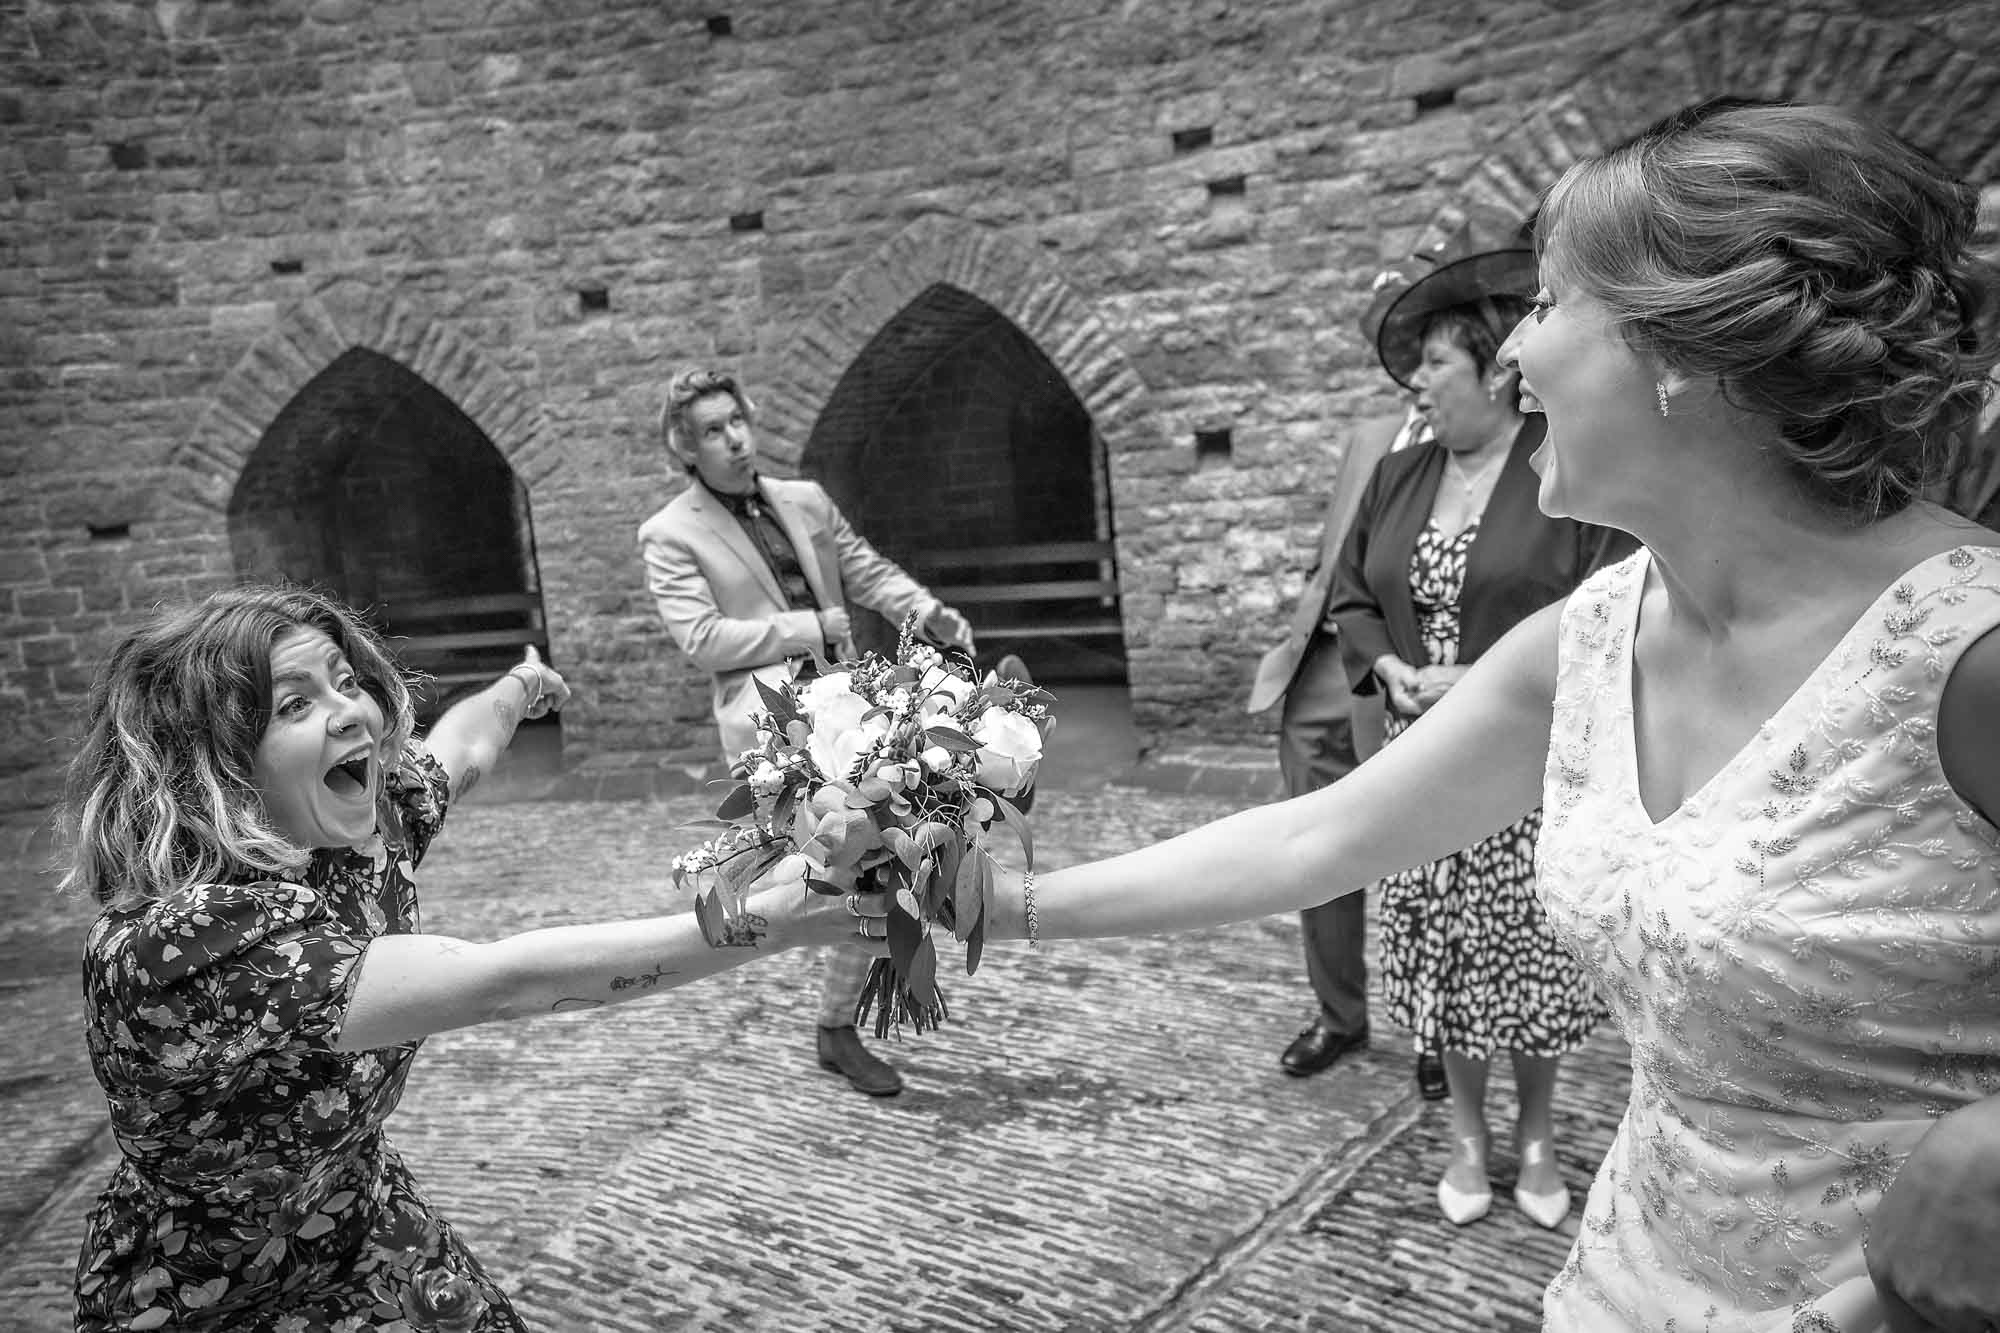 The bride hands the bouquet to a friend who is pointing at her partner as he runs off